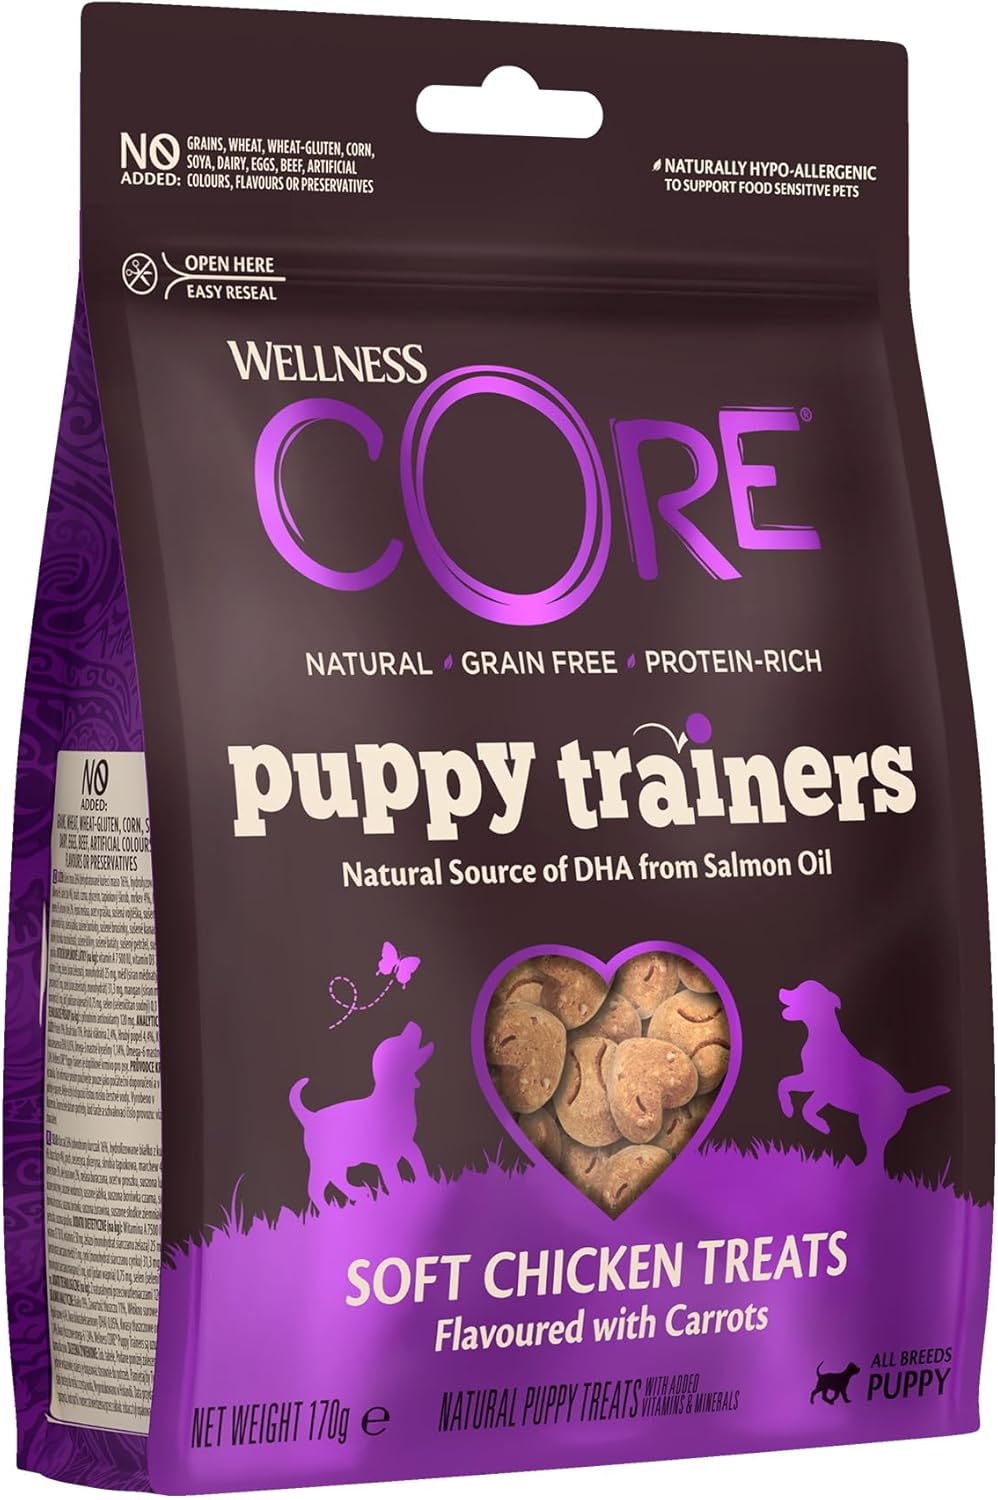 Wellness CORE Puppy Trainers, Treats for Puppy Training, Grain Free Puppy Treats, Rich in Meat, Perfect as Training Treats, 170g?10539